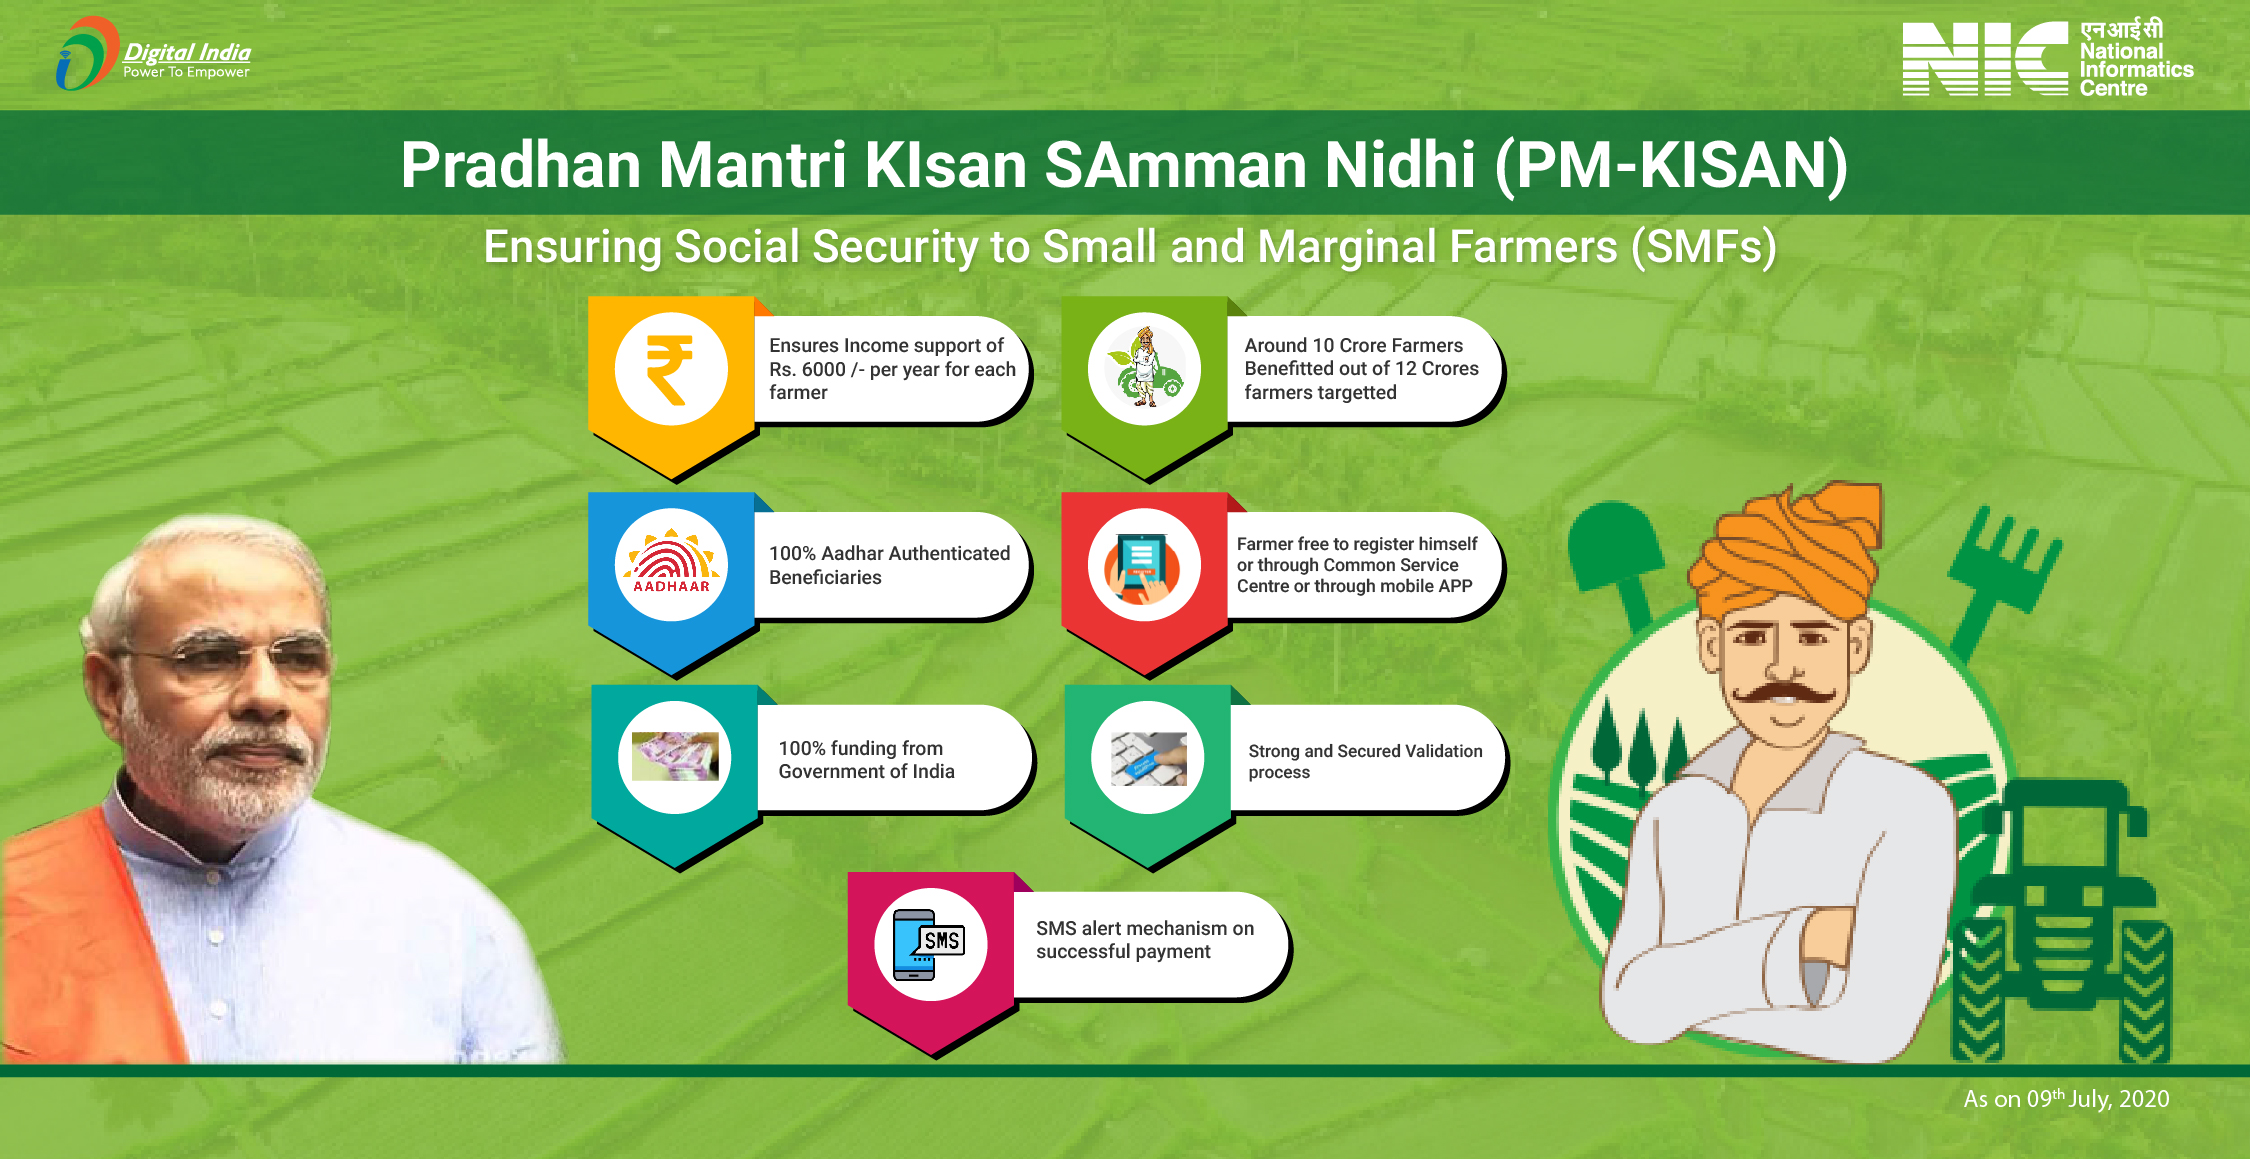 In this image we see the farmer with tractor and pm kisan samman yojana logo
